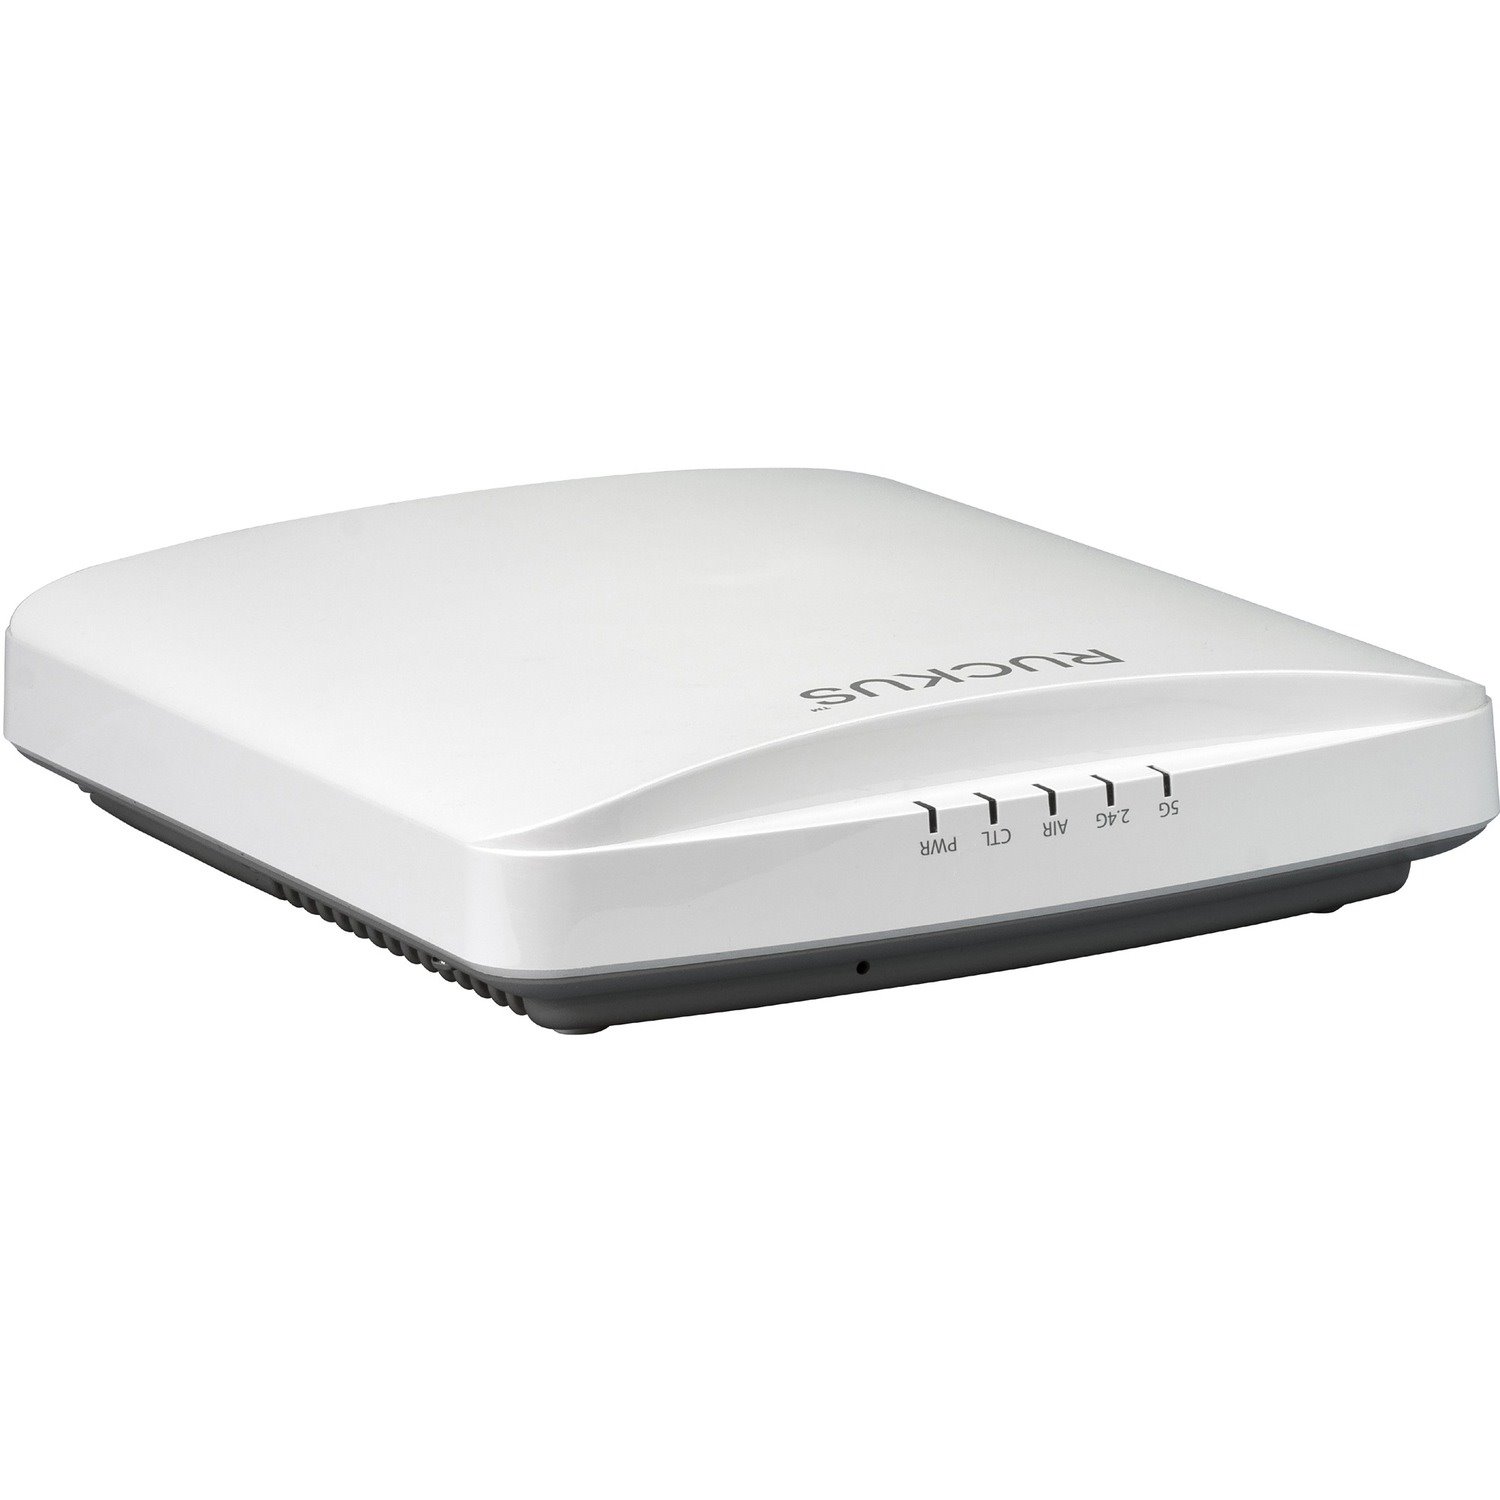 Ruckus R750 Wi-Fi 6 Indoor Access Point